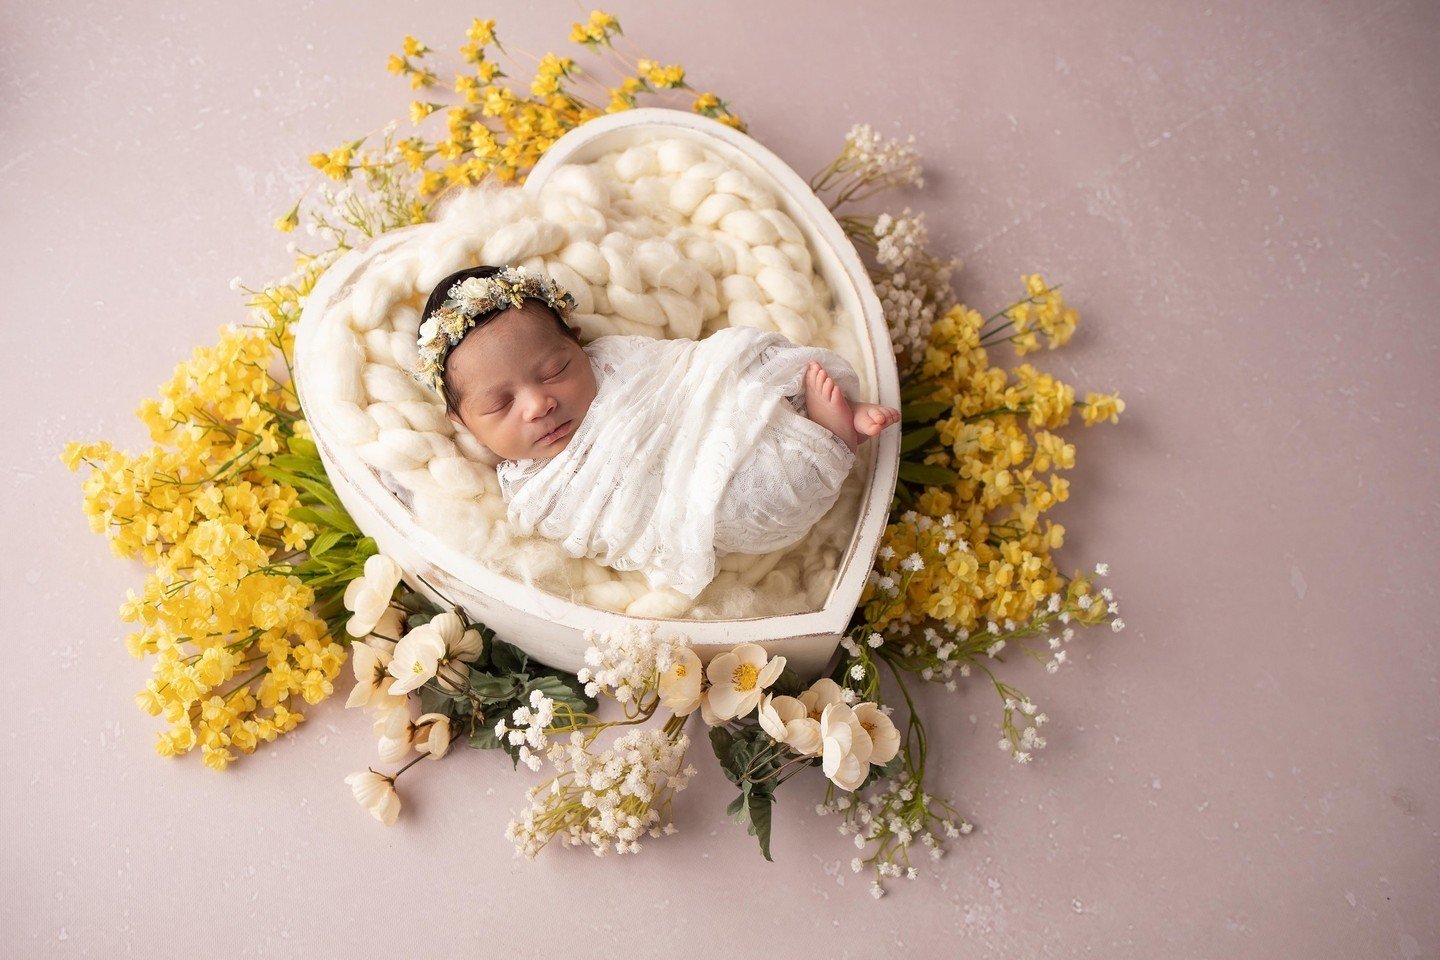 Capture the sweetest moments with our heart prop during your newborn girl photoshoot. Just one of many props you can choose from for your session.⁠
⁠
 Book your session online now at www.priscillagreenphotography.com and create timeless memories that